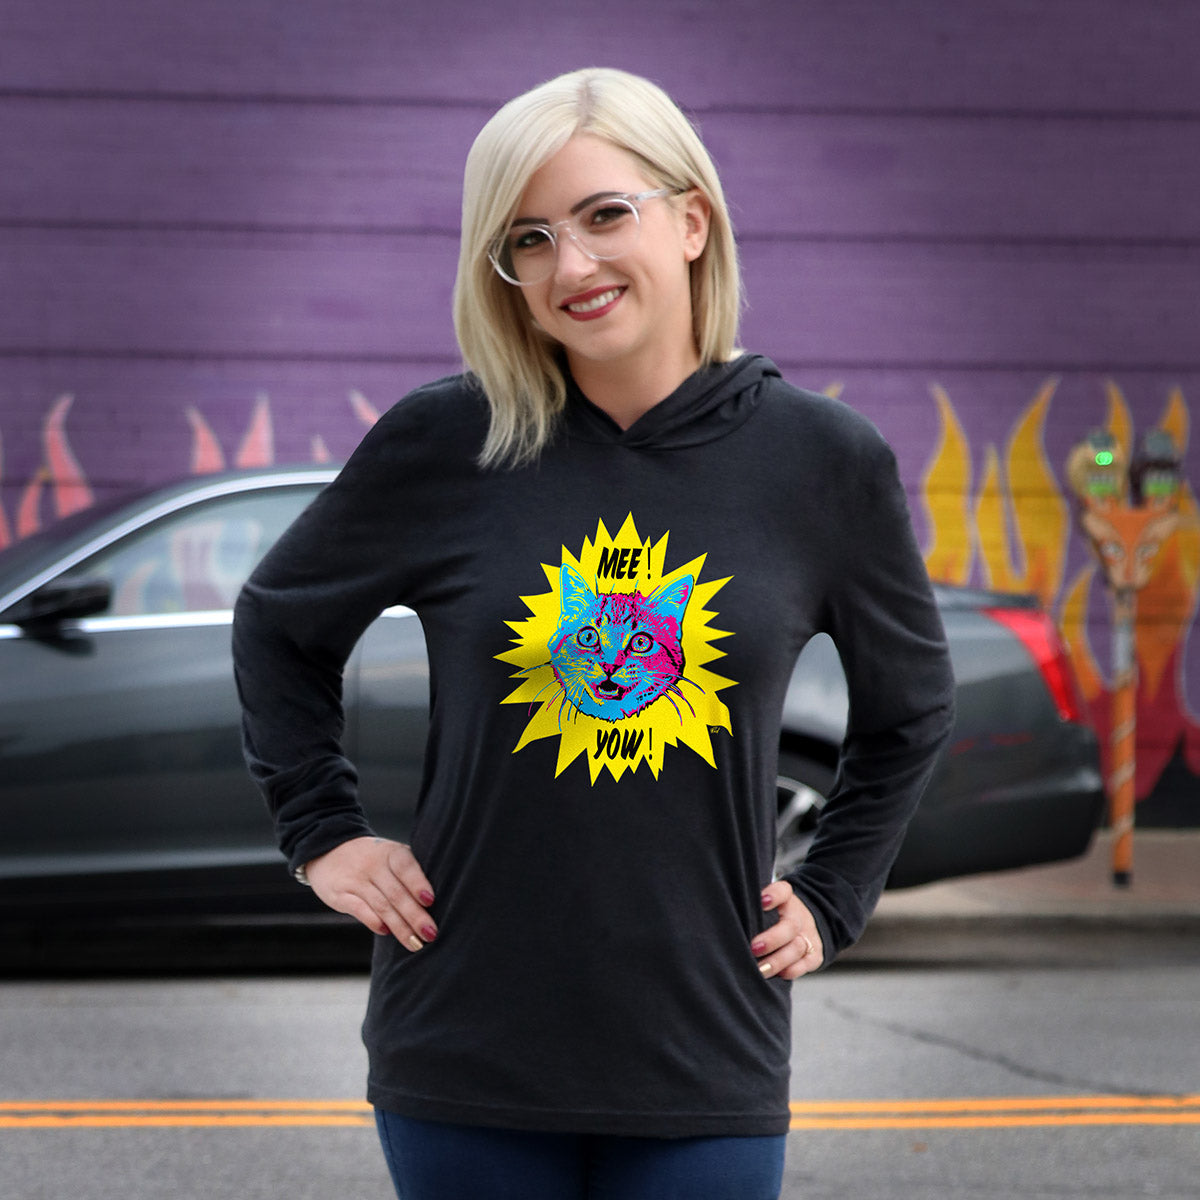 District Made Me! Yow! Black Perfect Tri Long Sleeve Hoodie for her –  Skinny Pete's Catnip